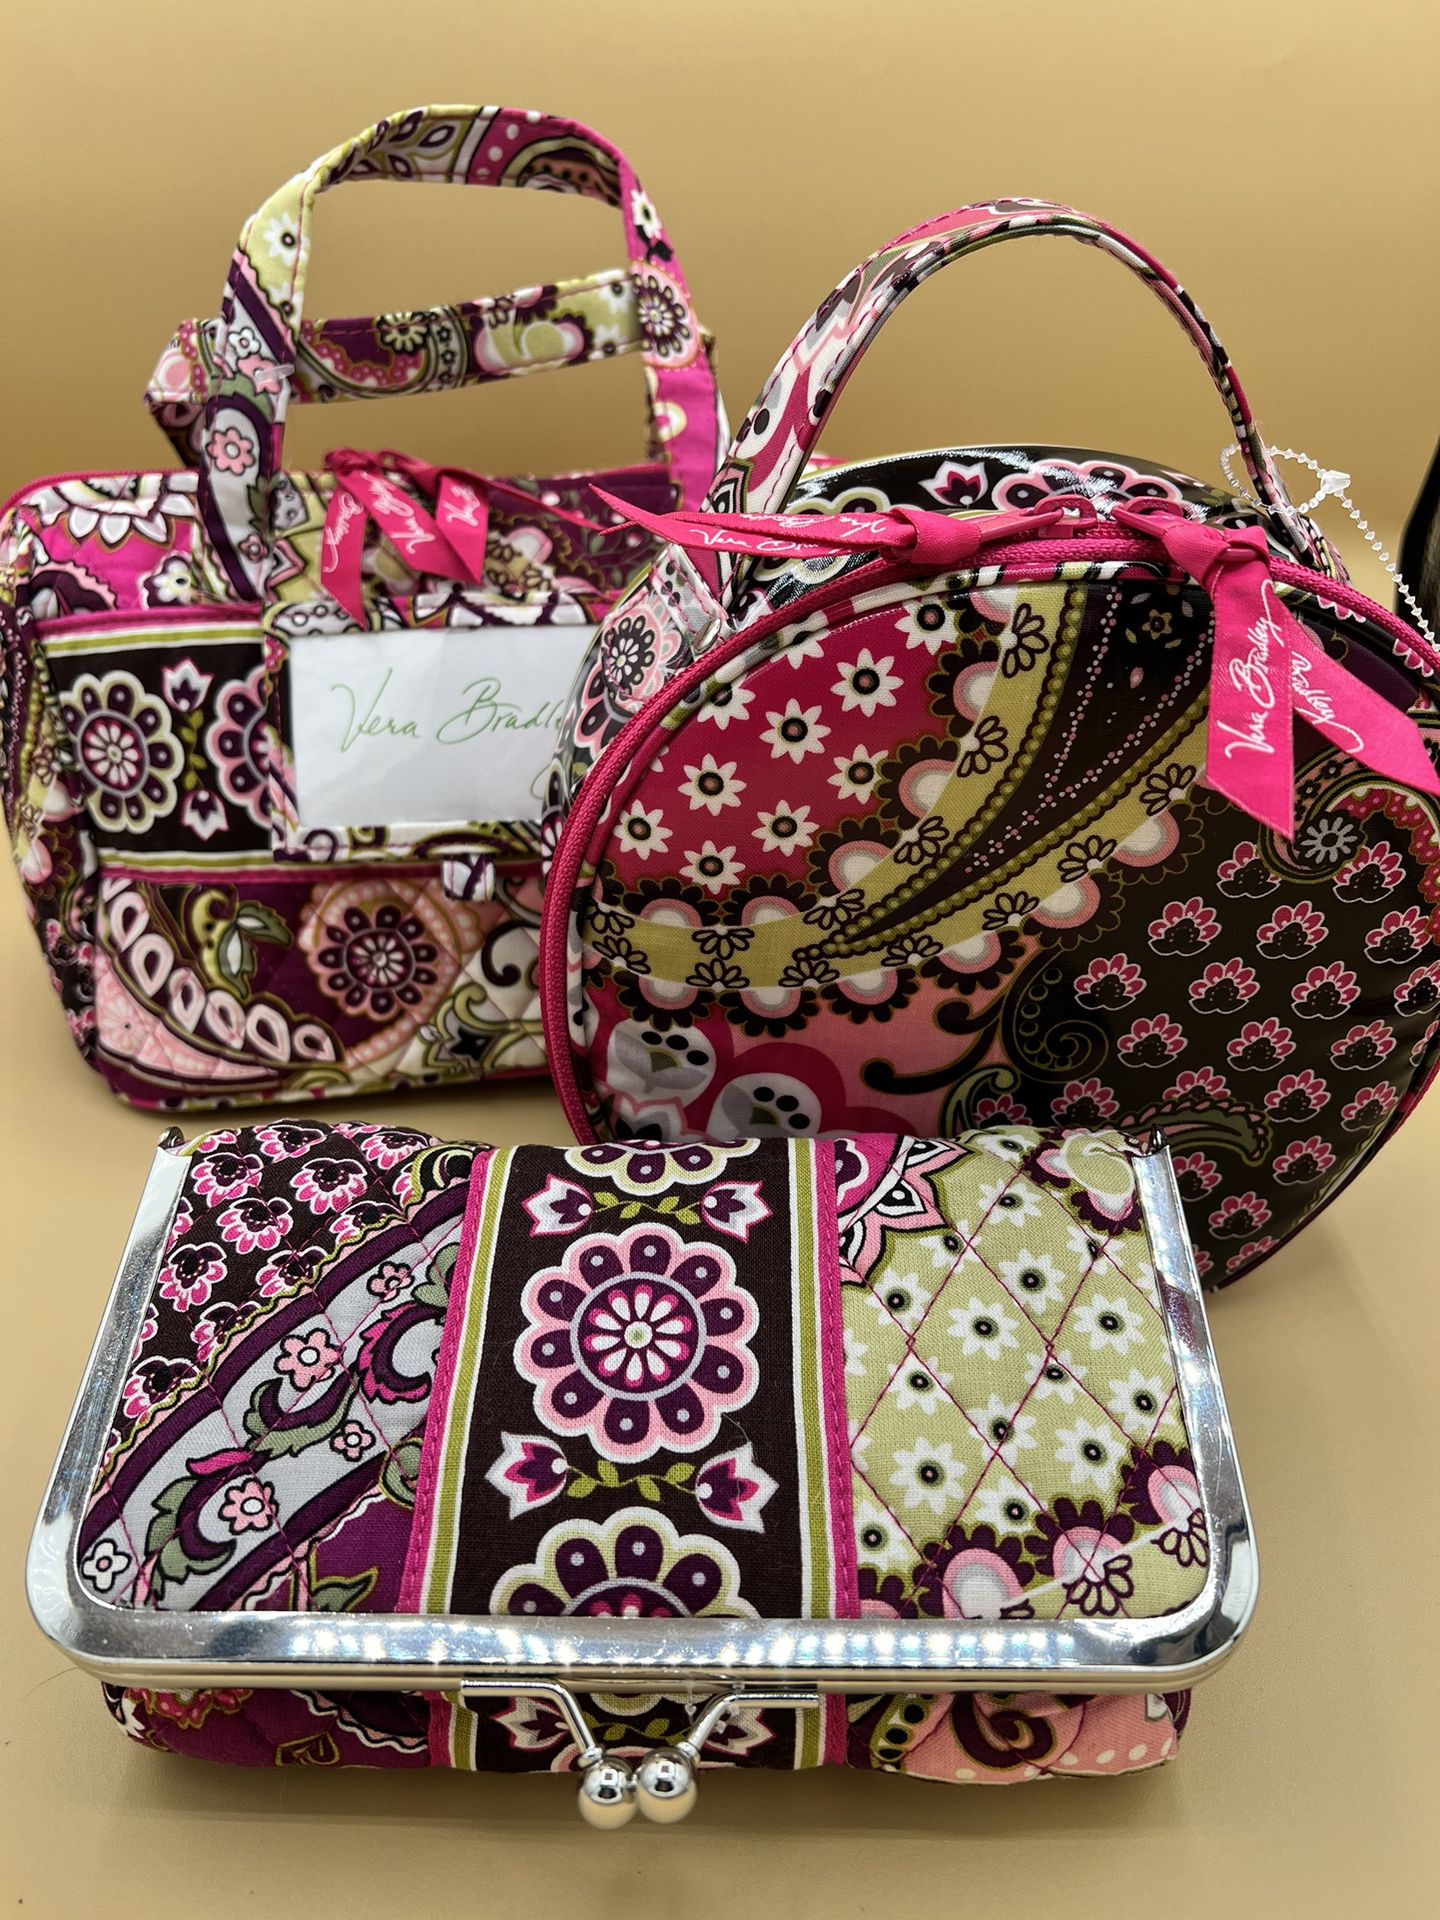 Vera Bradley Very Berry Insulated Lunch Bag, Make-up Case, Kiss Cosmetic Retired